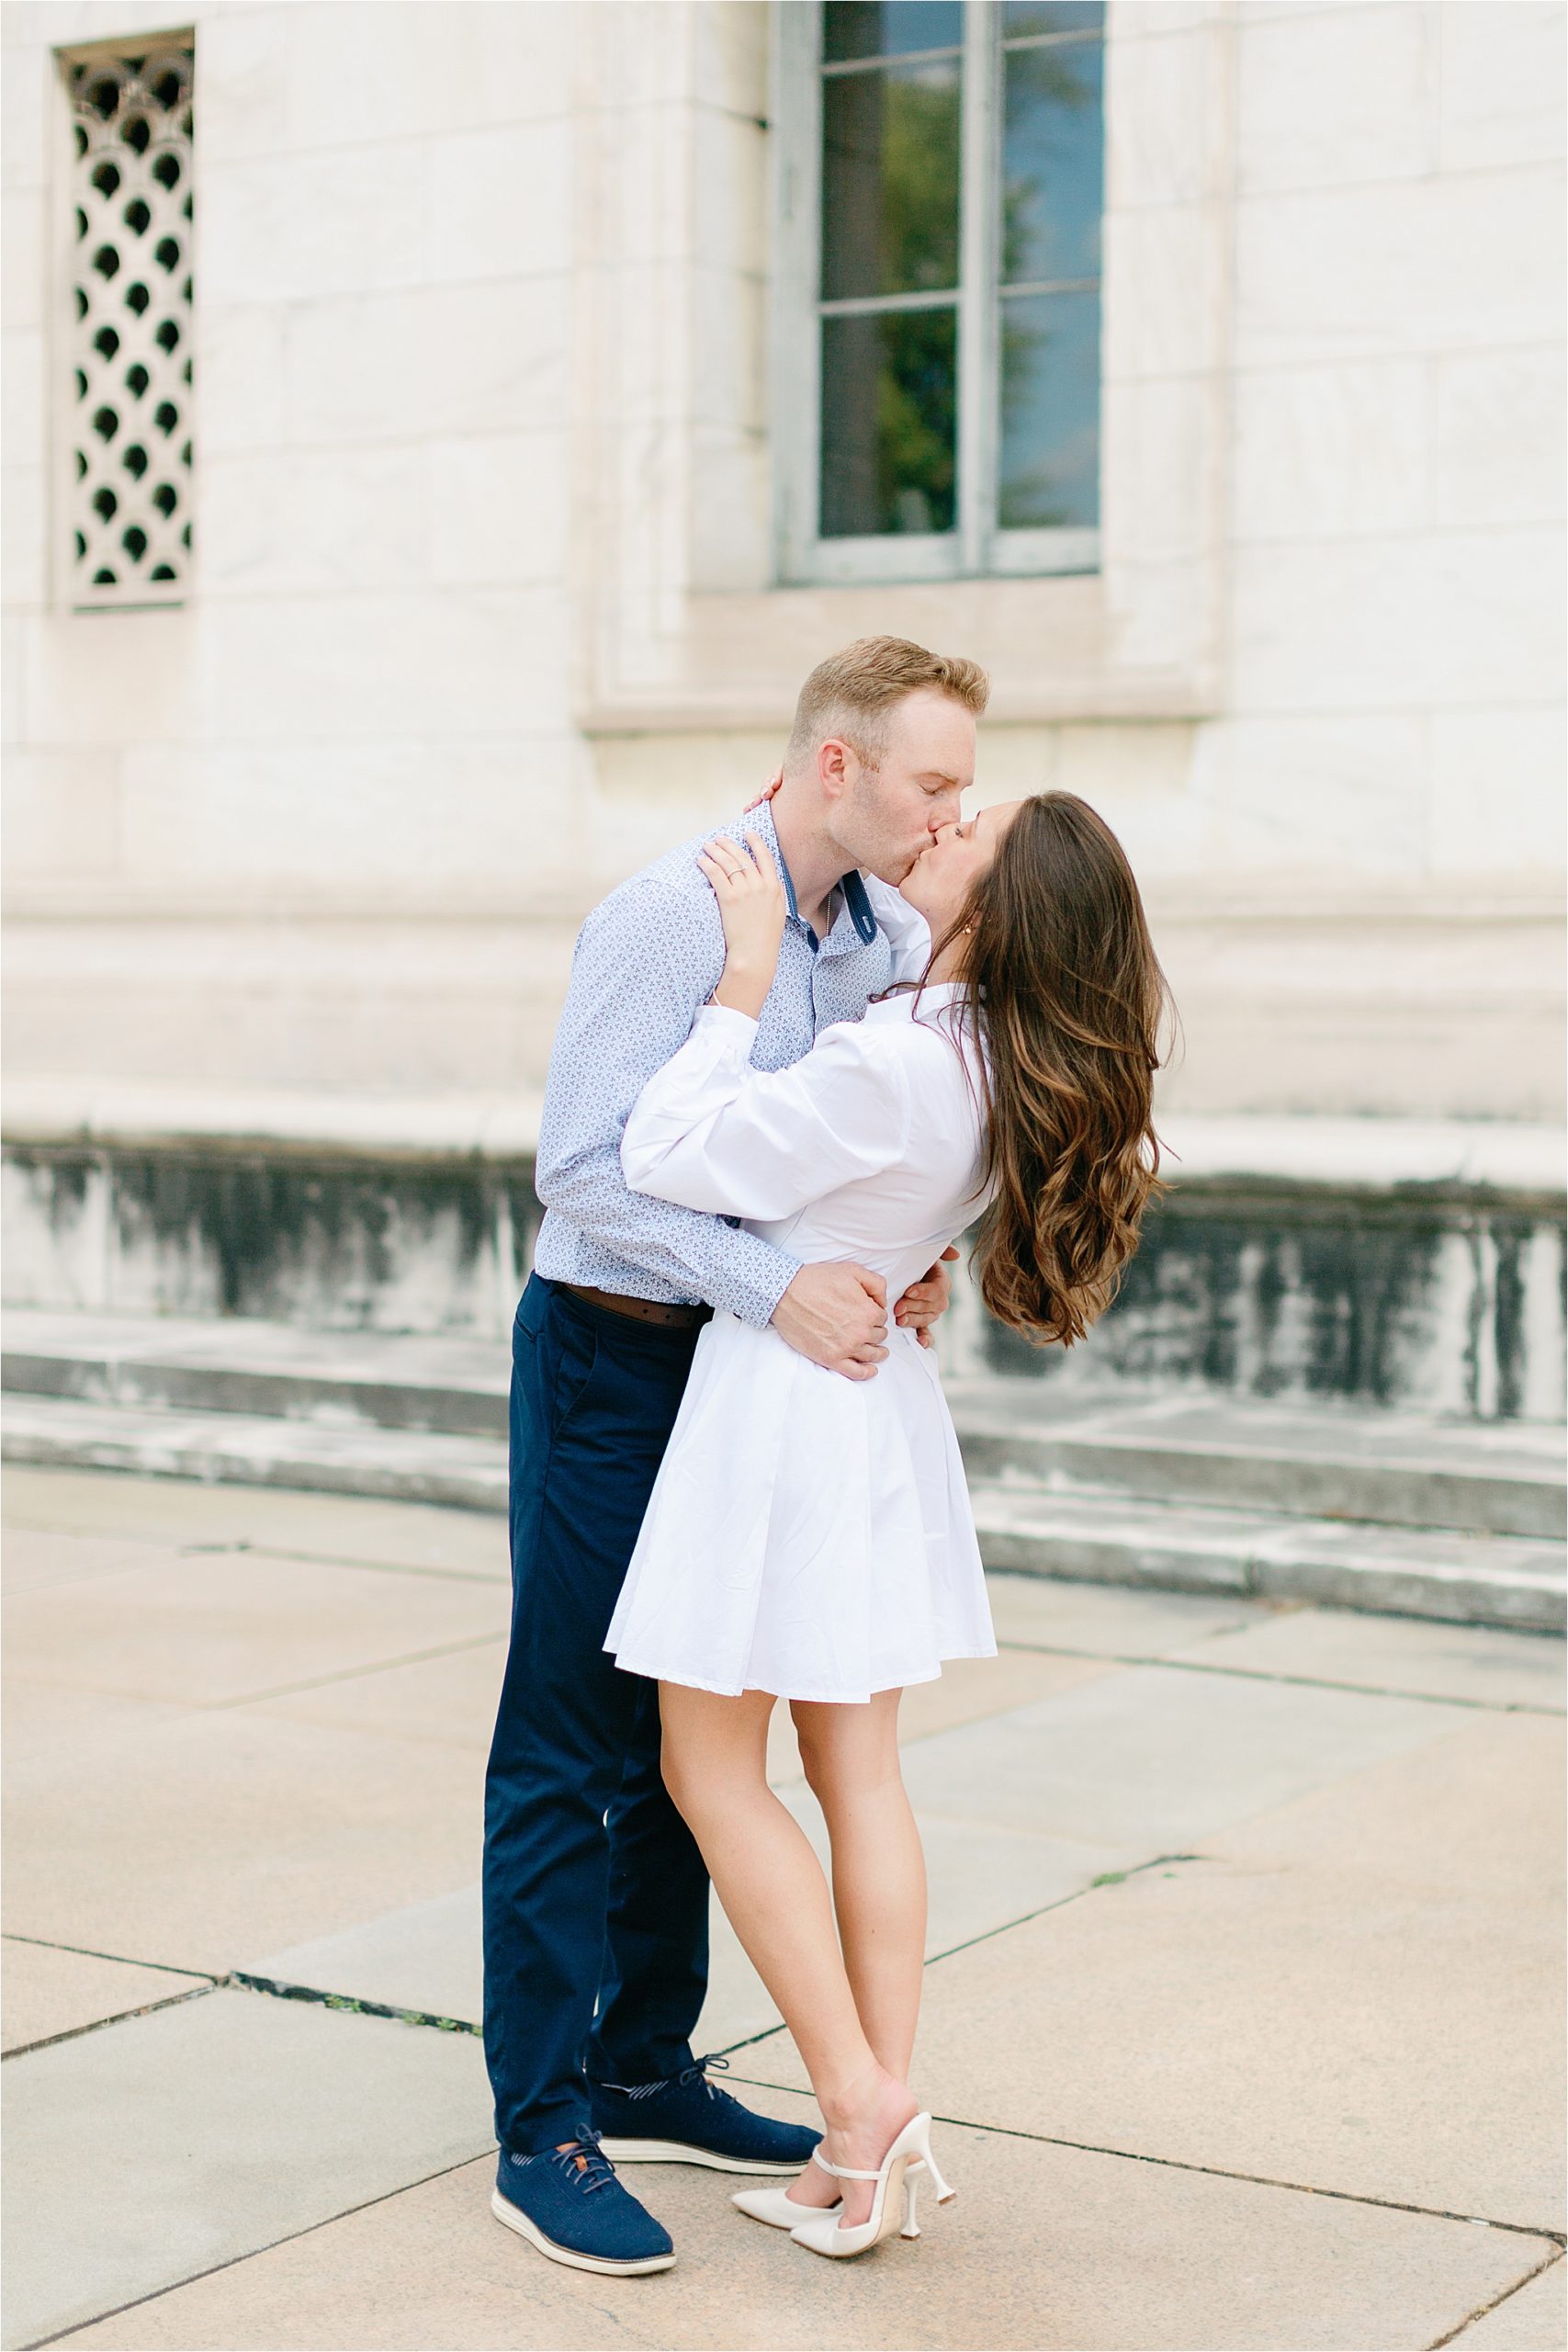 Michigan wedding photographer engagement session at Detroit library